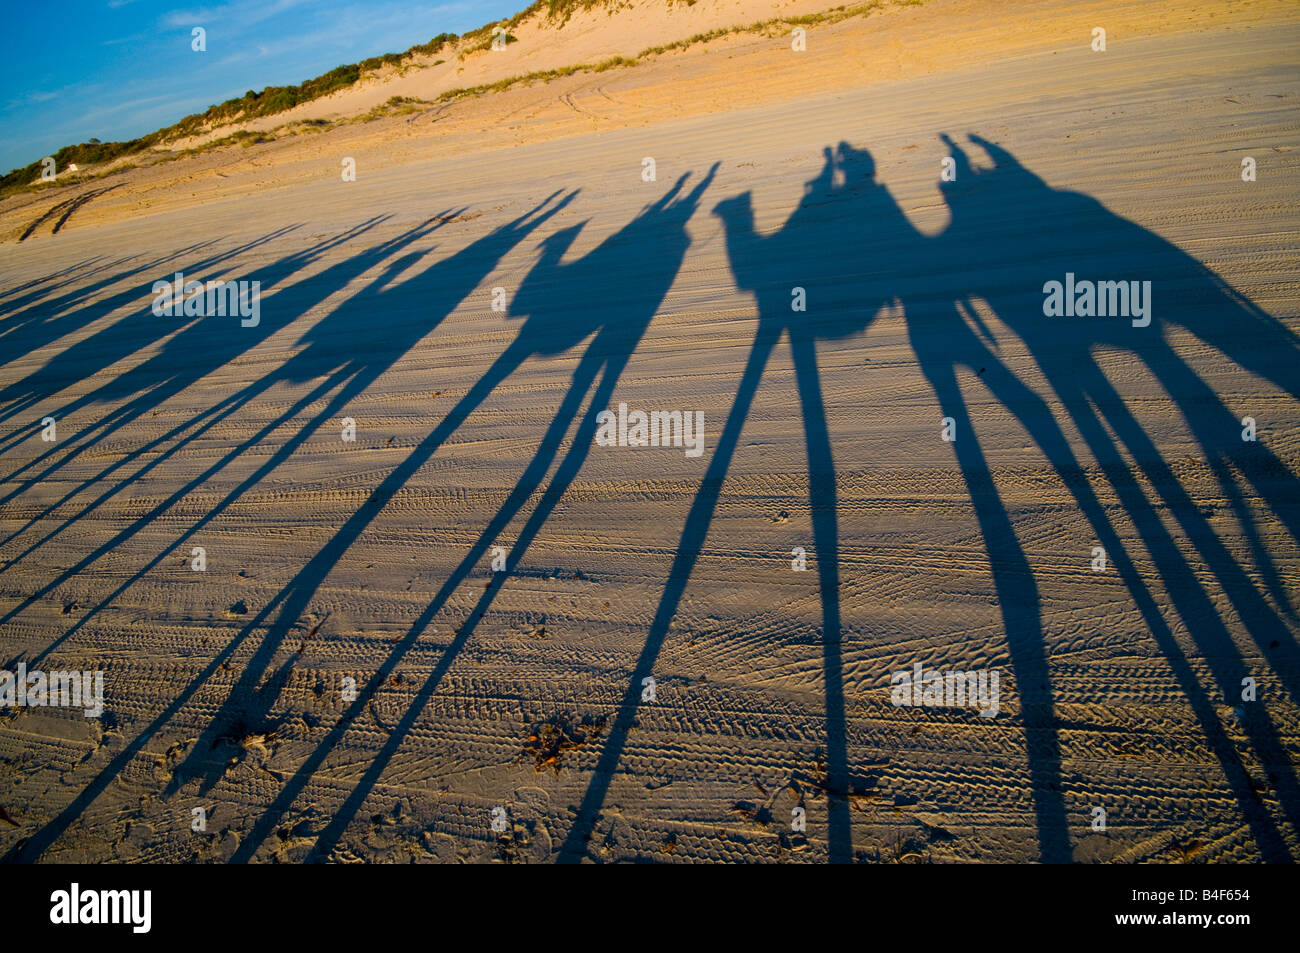 Shadows of camel riding tour on the sand at sunset on Cable Beach Broome Western Australia Stock Photo